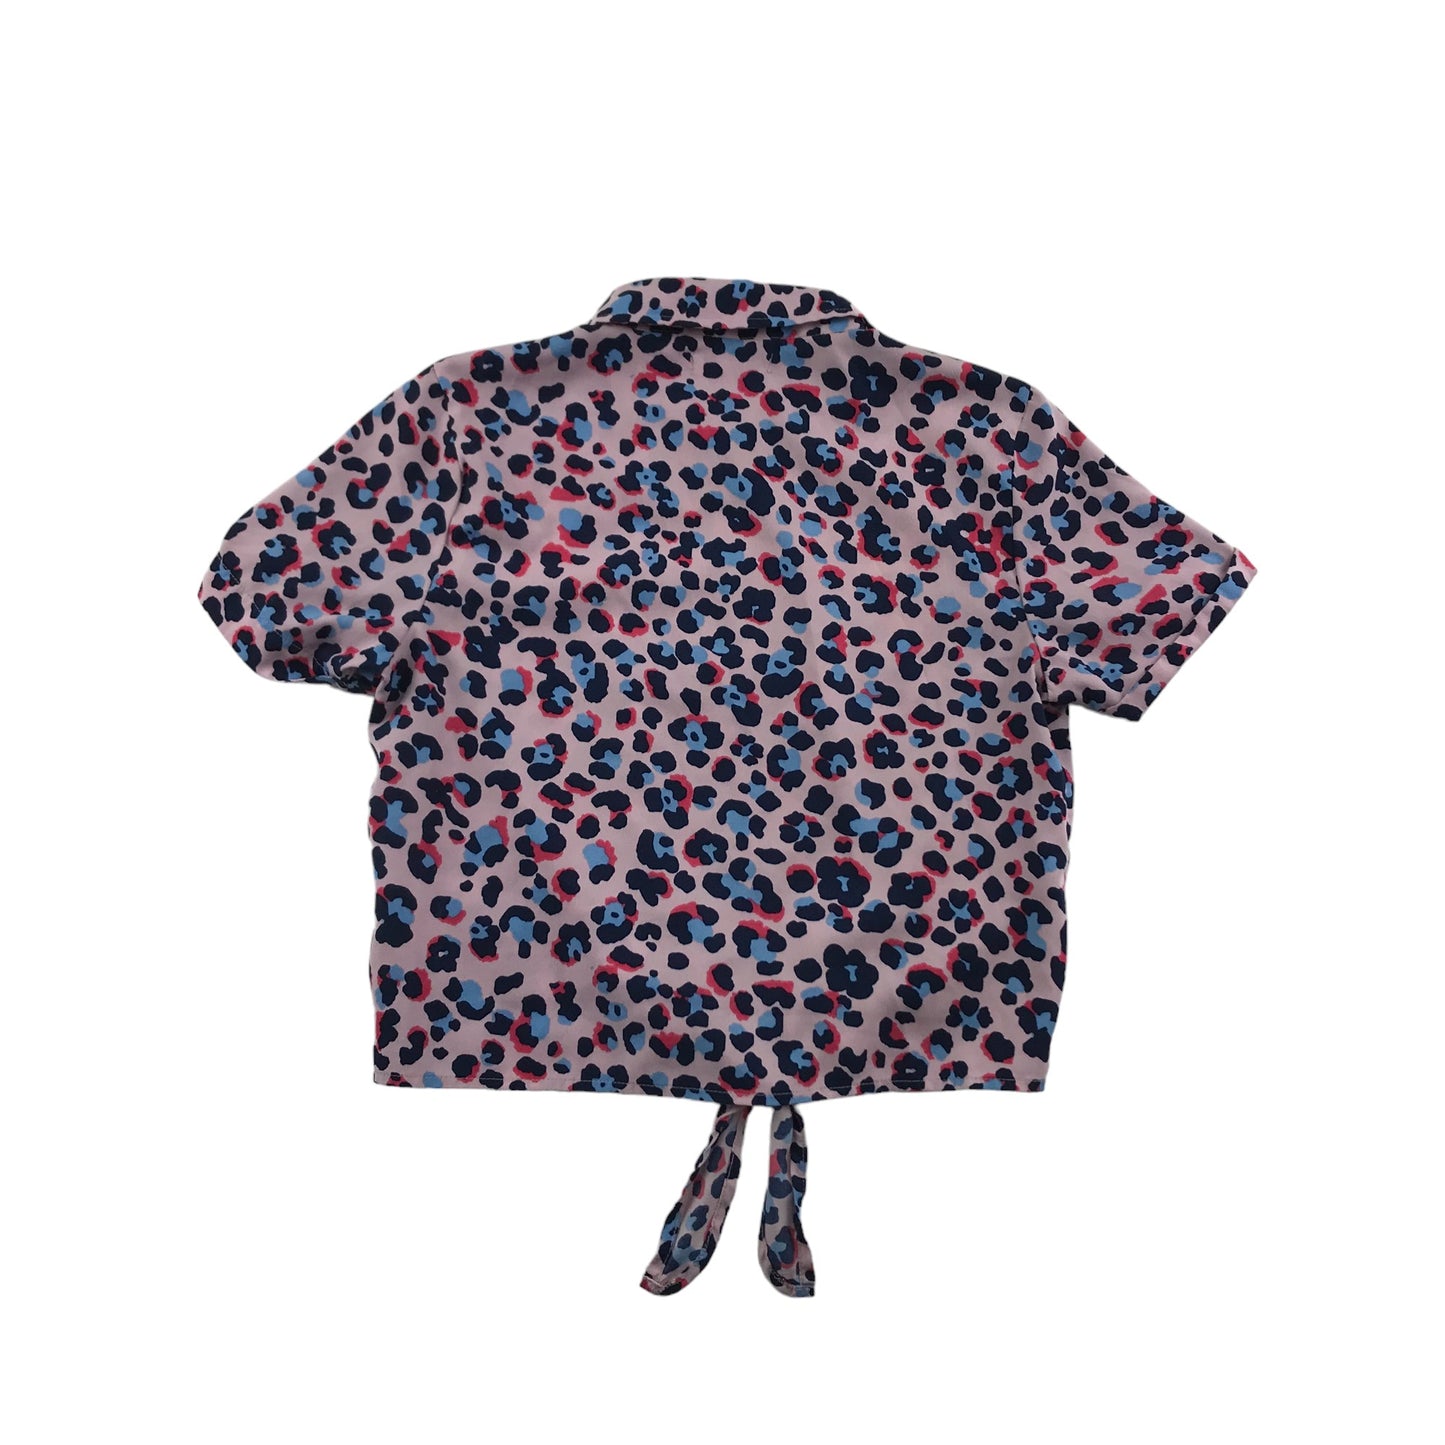 Bluezoo Top Age 10 Pink Leopard Spots Cropped Blouse Shirt